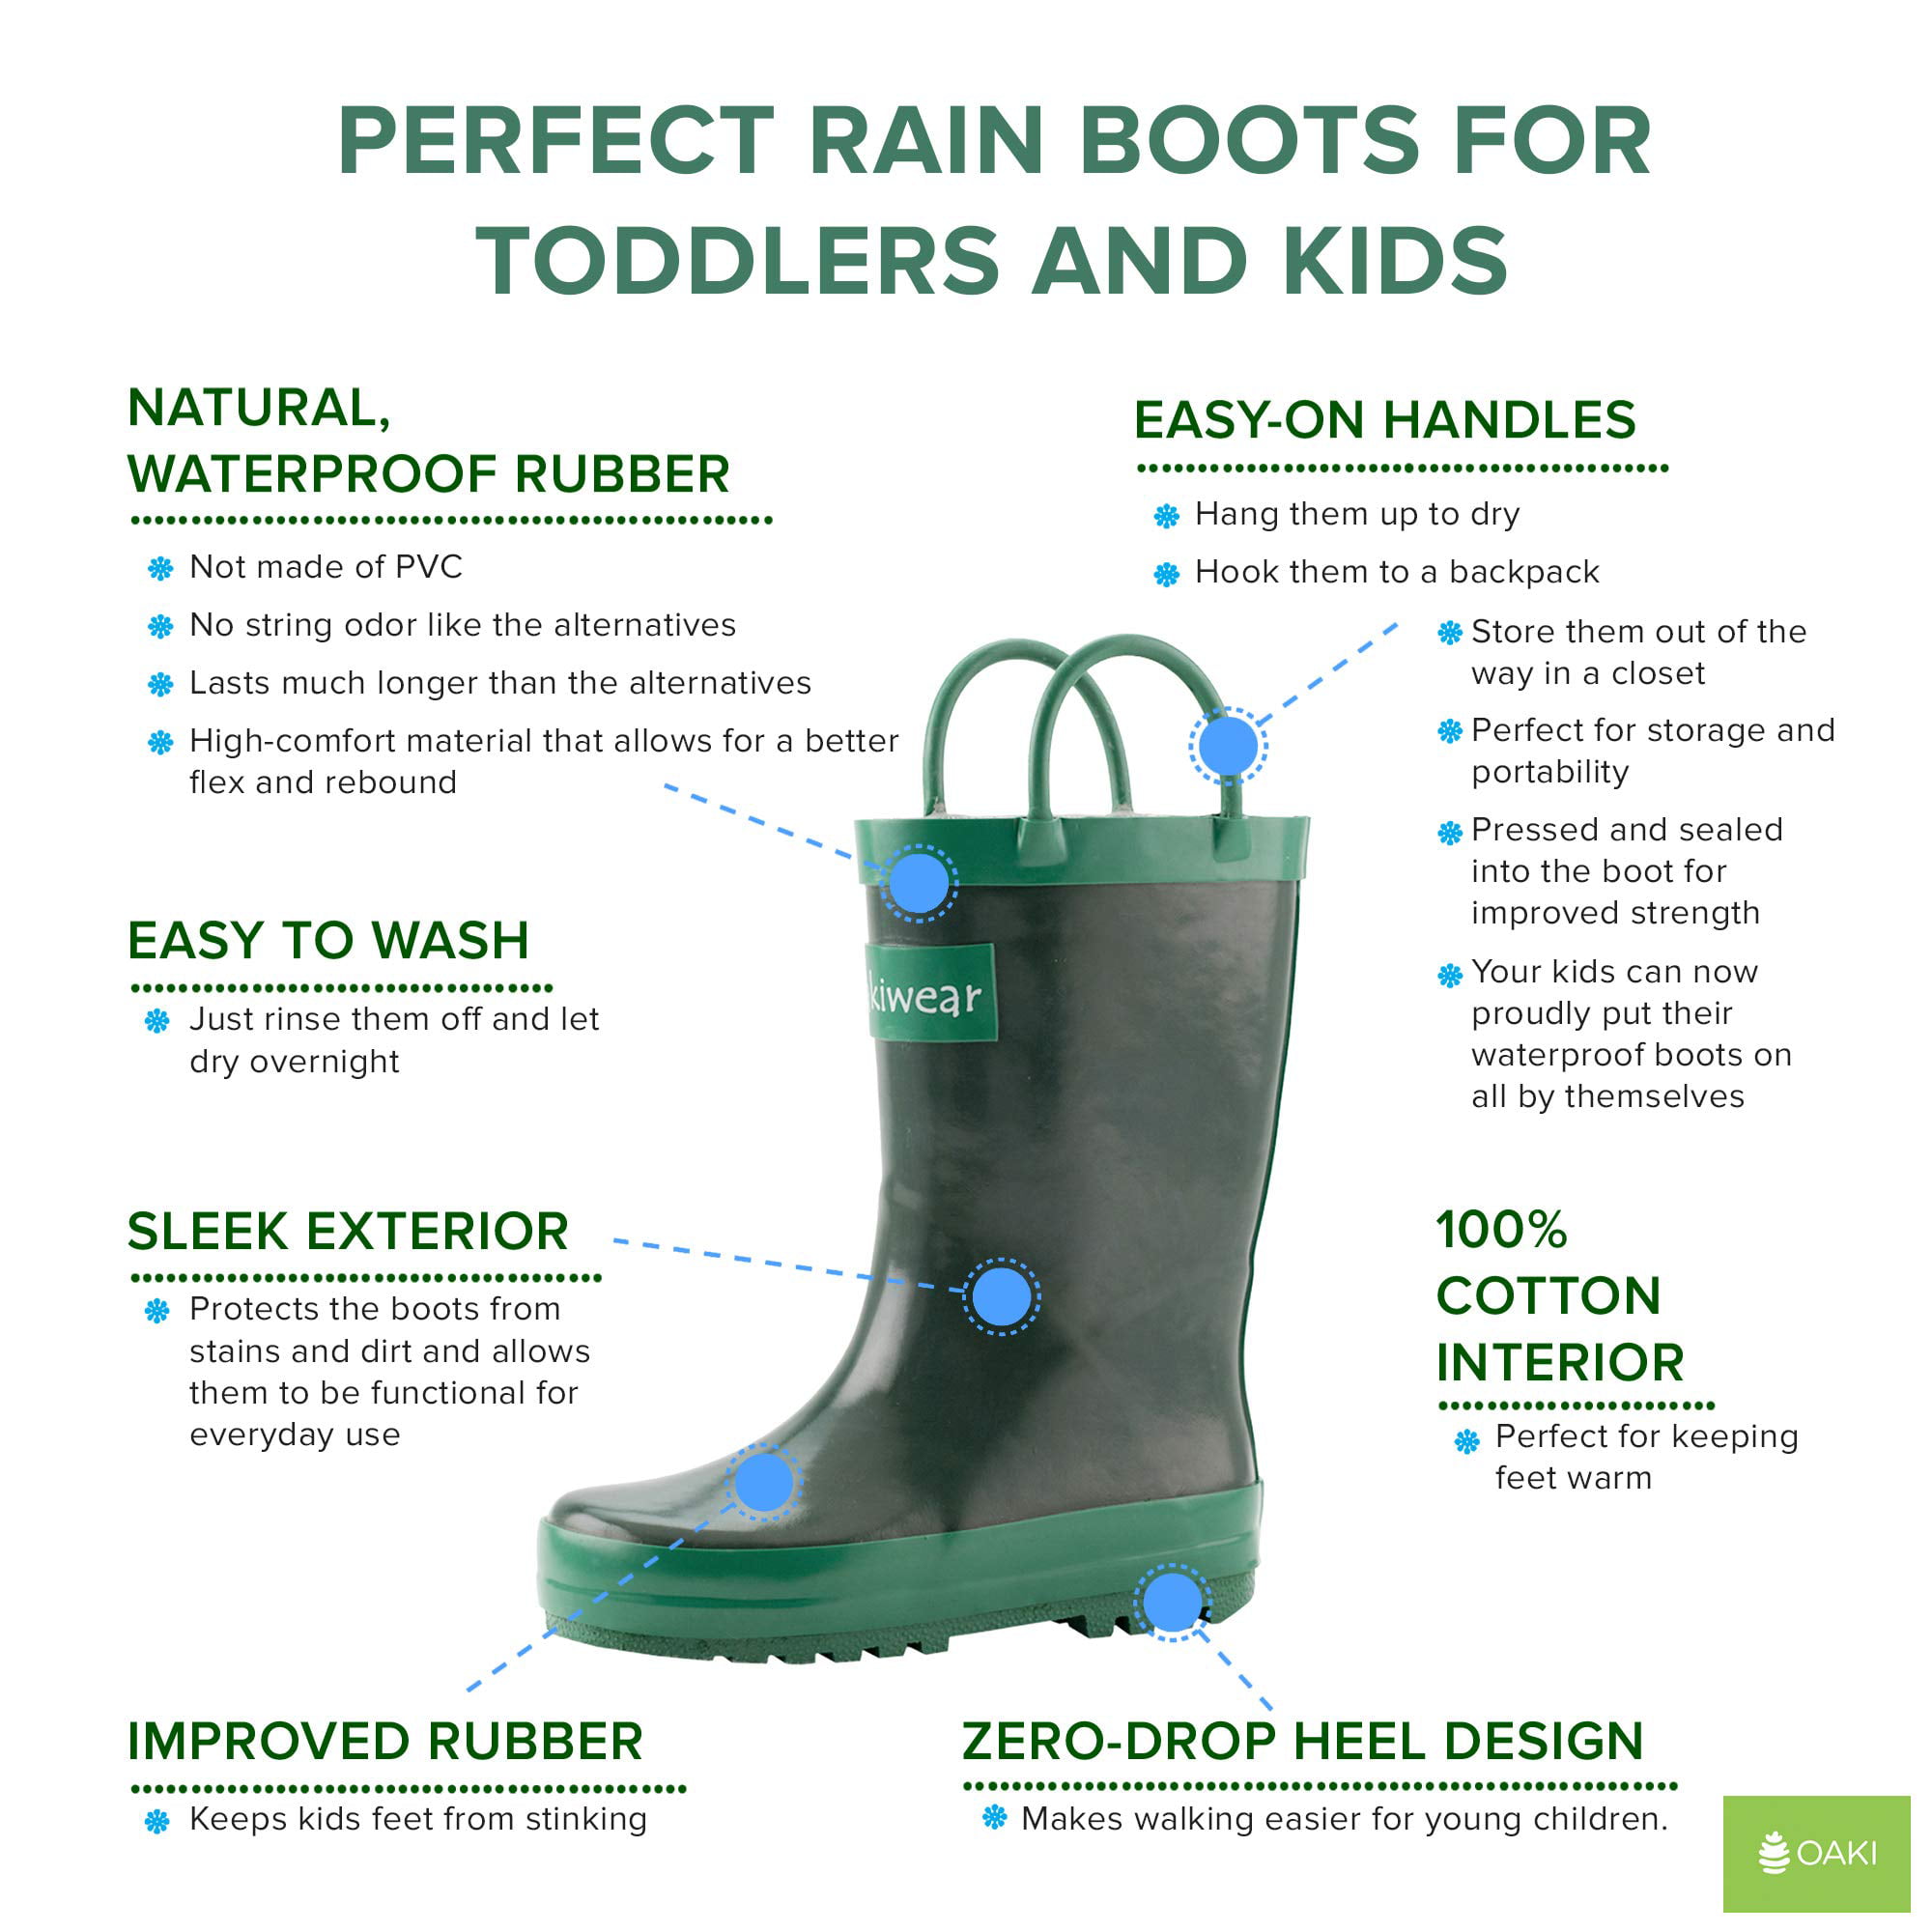 RANLY & SMILY Kids Waterproof Rubber Rain Boot with Easy Pull On Handles 